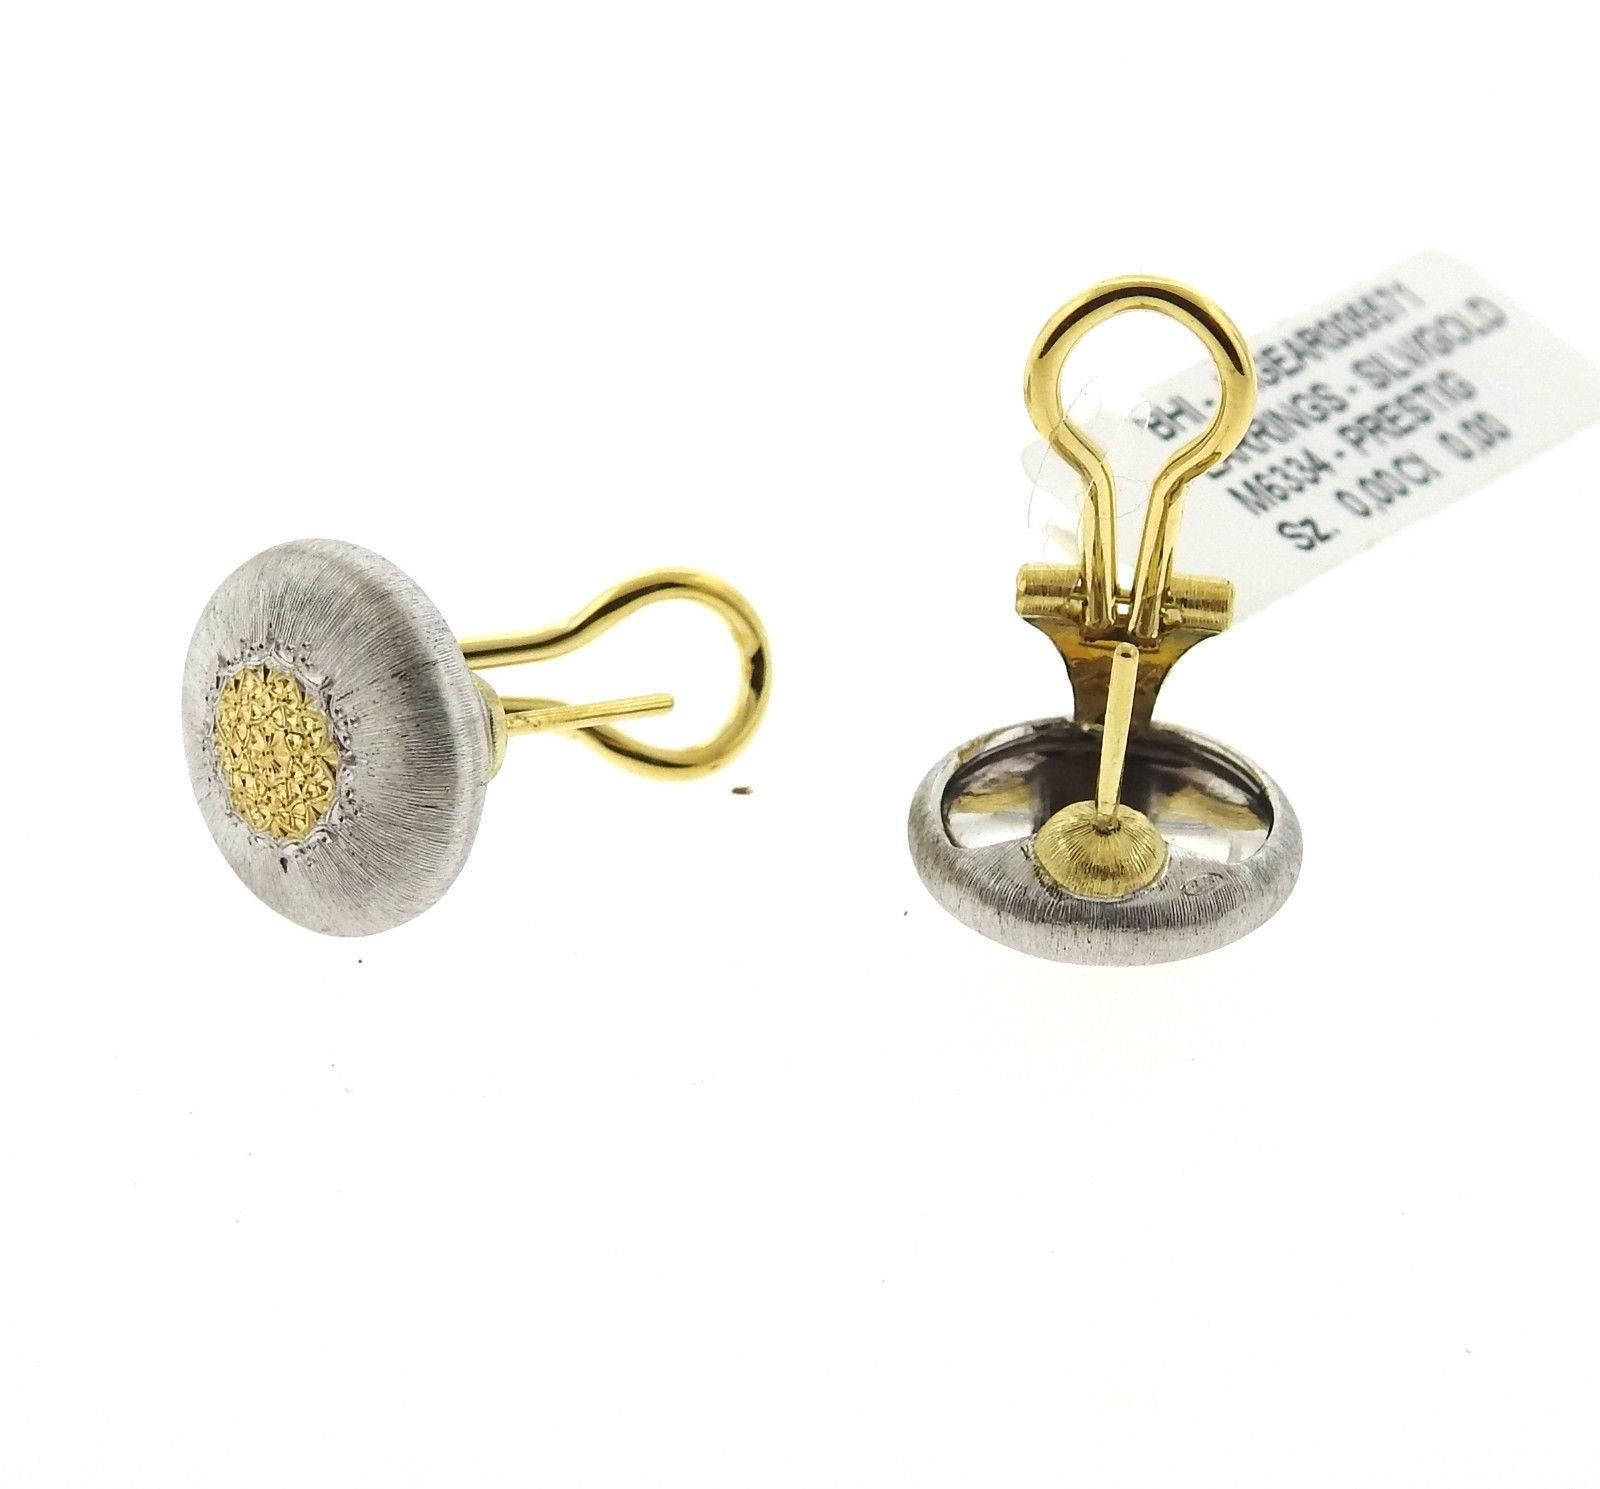 A pair of 18k yellow gold and sterling silver earrings by Buccellati.  The earrings measure 15mm in diameter and weigh 7.5 grams. Marked: Buccellati, Italy, 18k, M6334. 